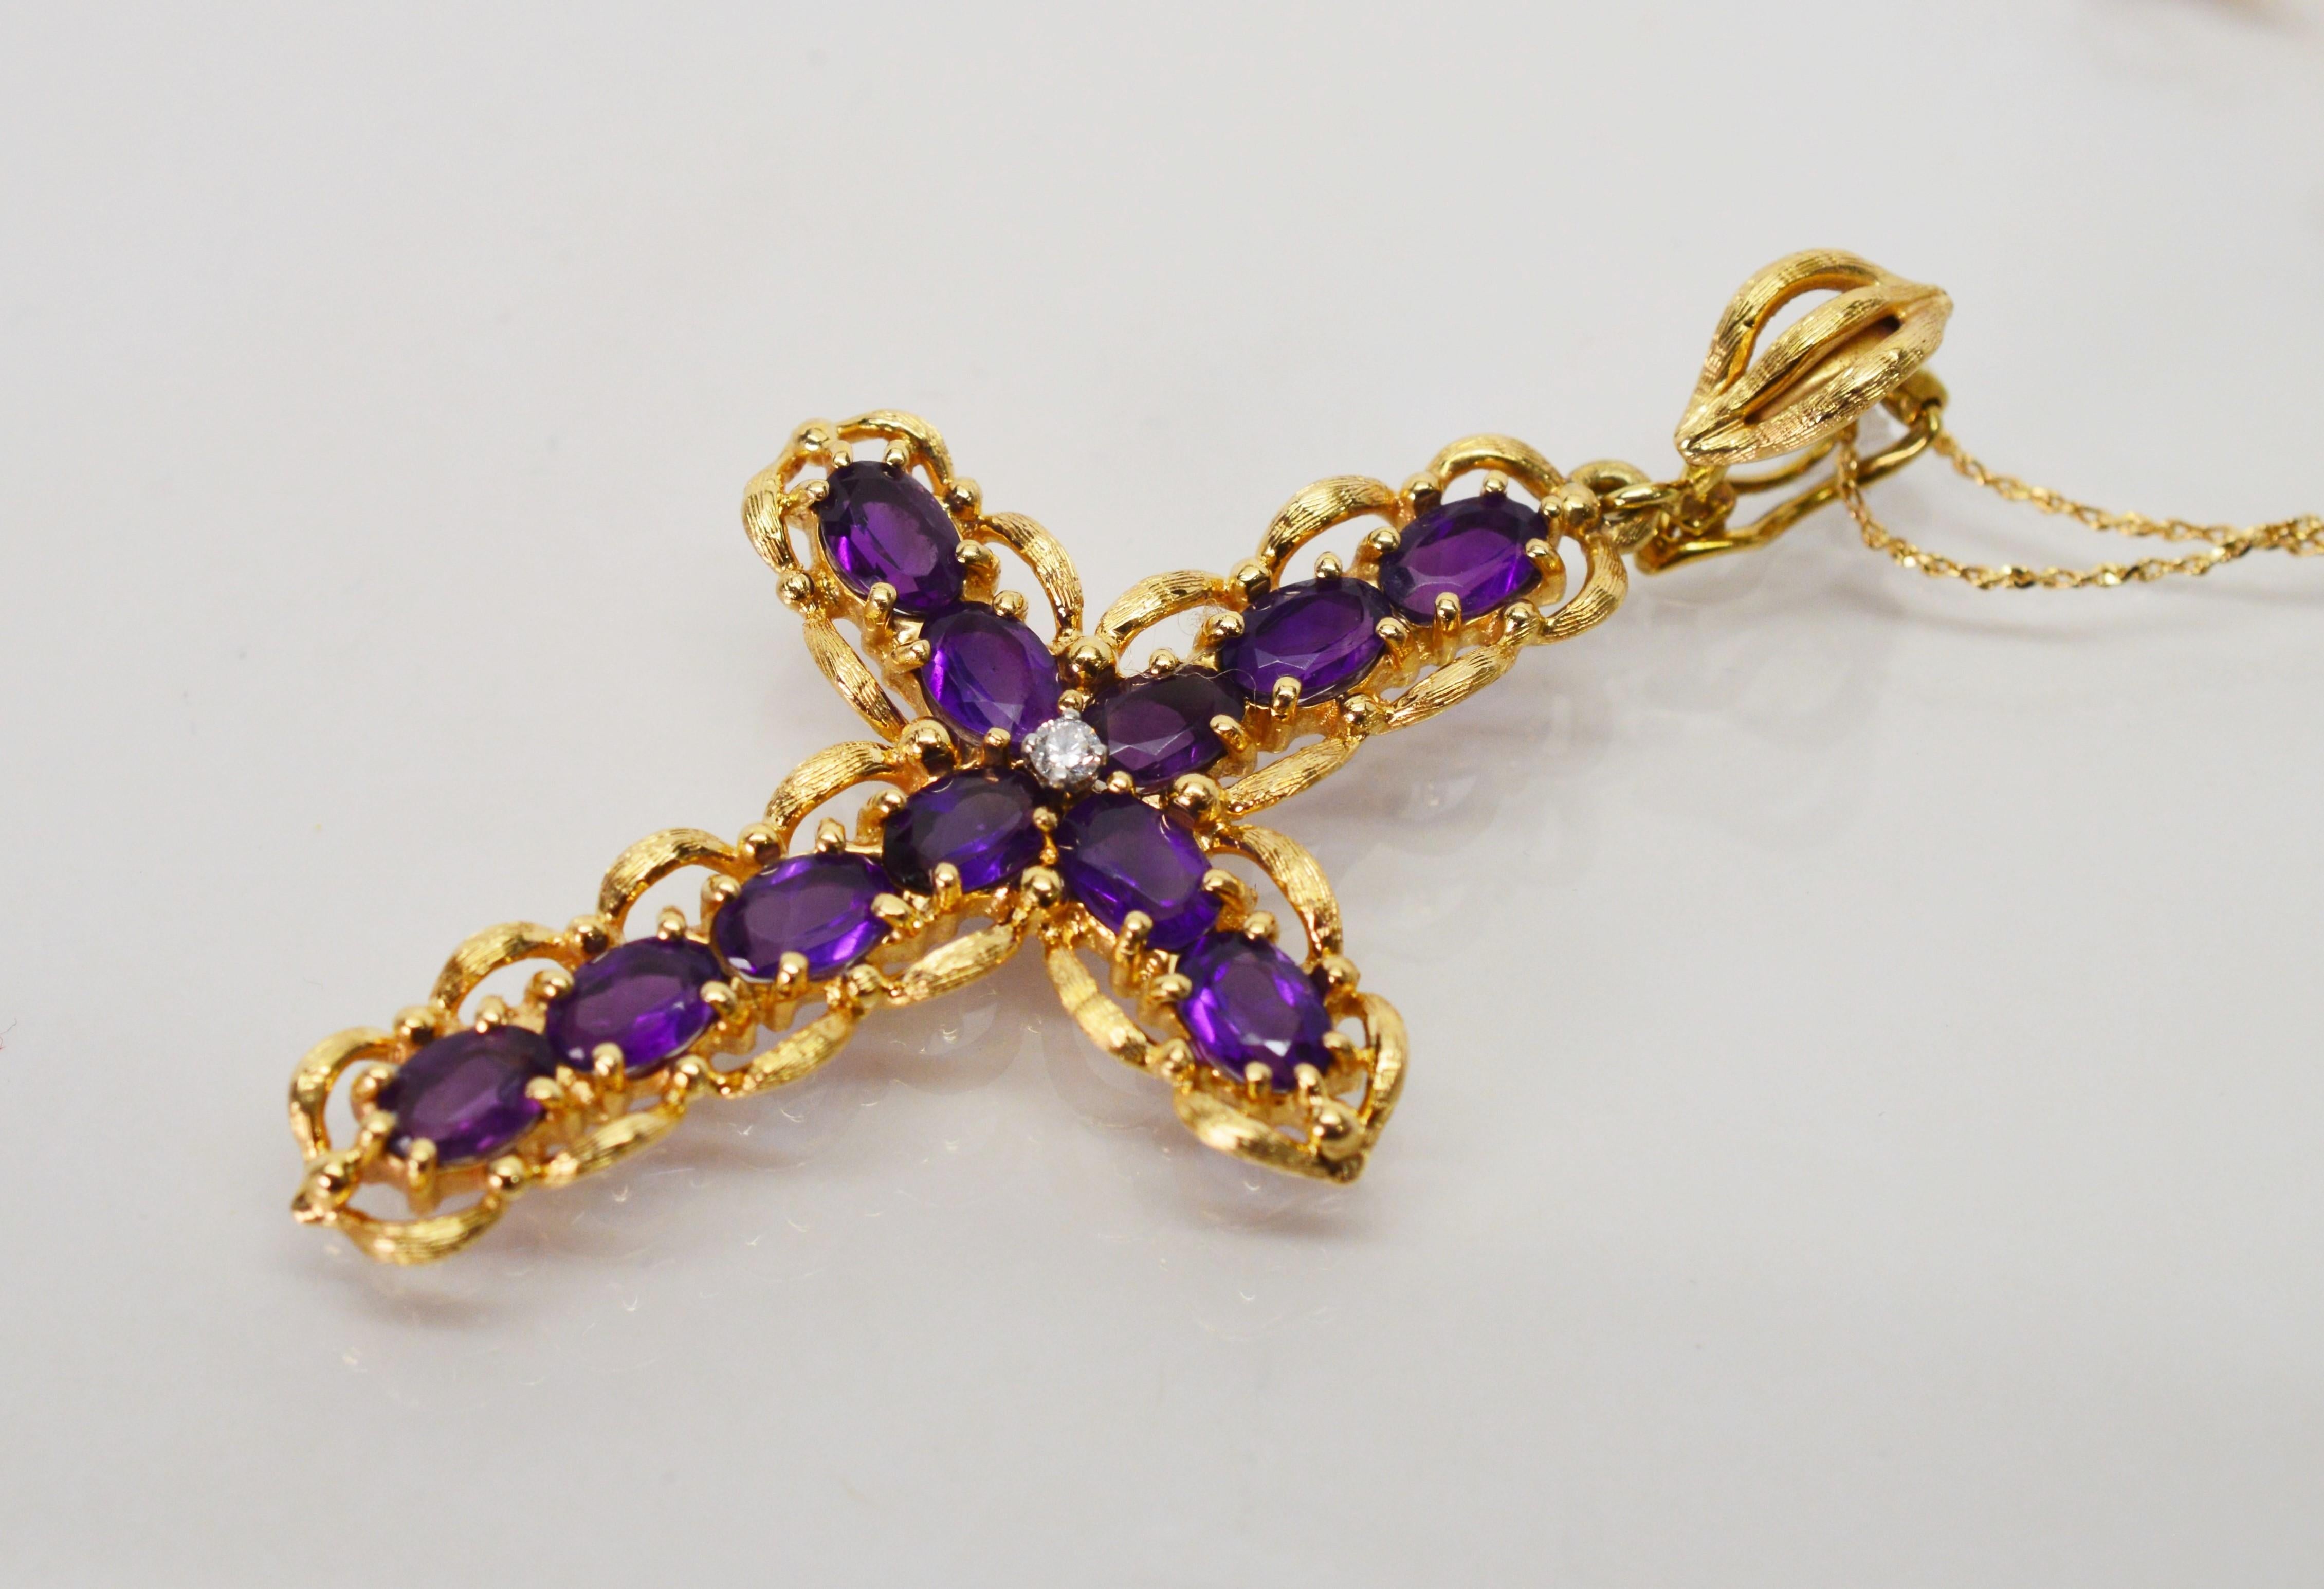 Nearly five carats of velvety purple amethyst gemstones and ribbons of fourteen karat yellow gold shaped this striking cross pendant with .02 carat center diamond accent. On an eighteen inch chain yellow gold chain, the pendant is fitted with an